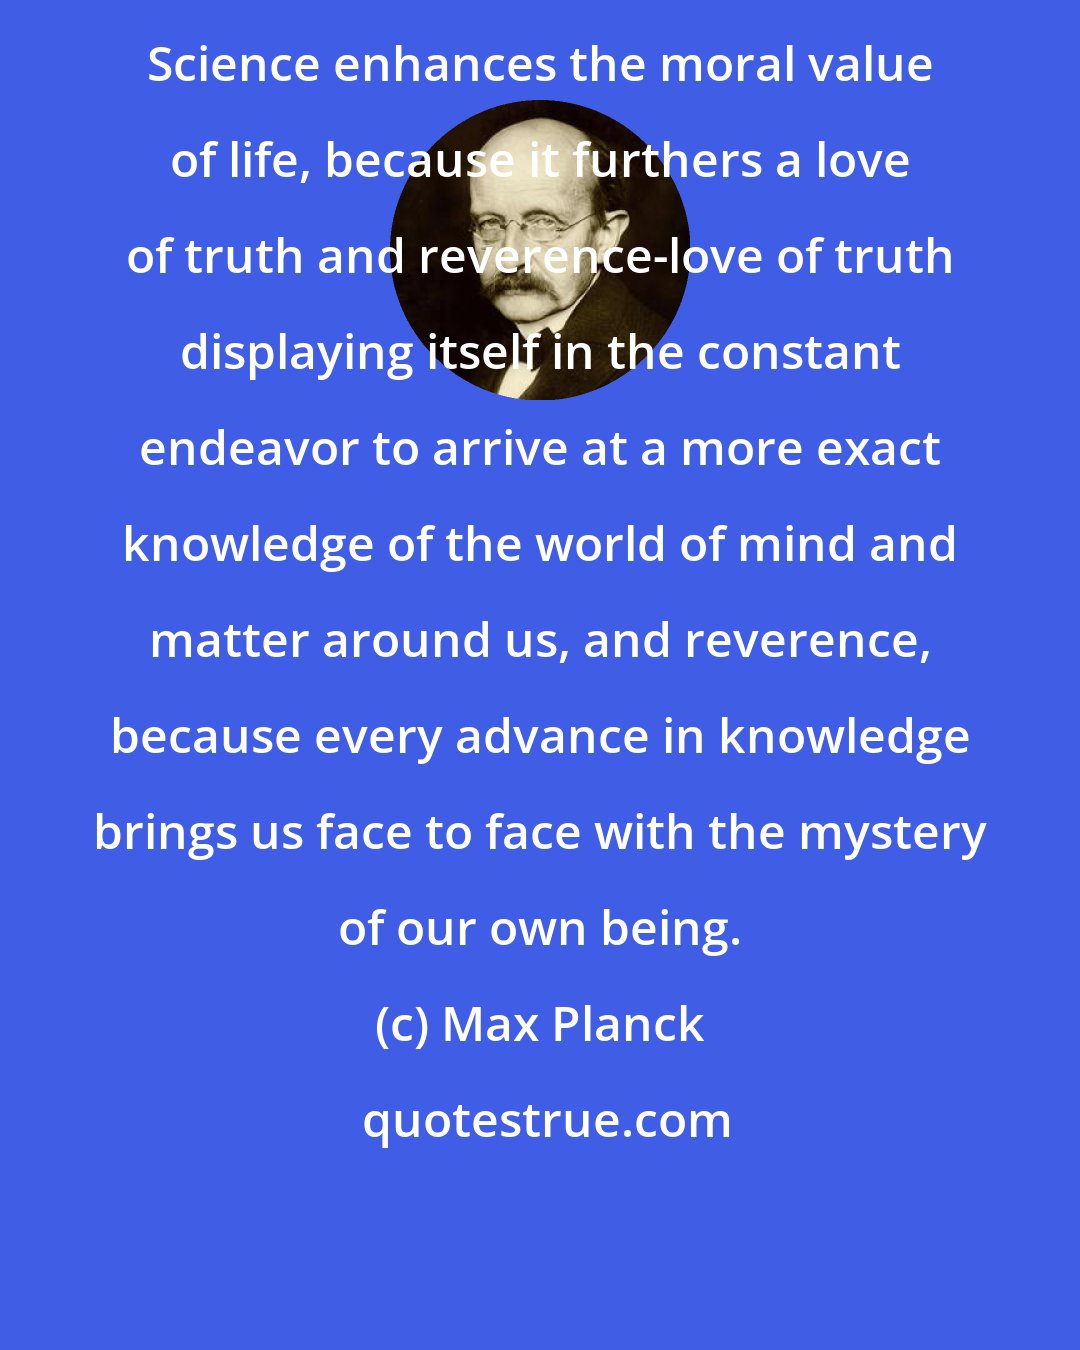 Max Planck: Science enhances the moral value of life, because it furthers a love of truth and reverence-love of truth displaying itself in the constant endeavor to arrive at a more exact knowledge of the world of mind and matter around us, and reverence, because every advance in knowledge brings us face to face with the mystery of our own being.